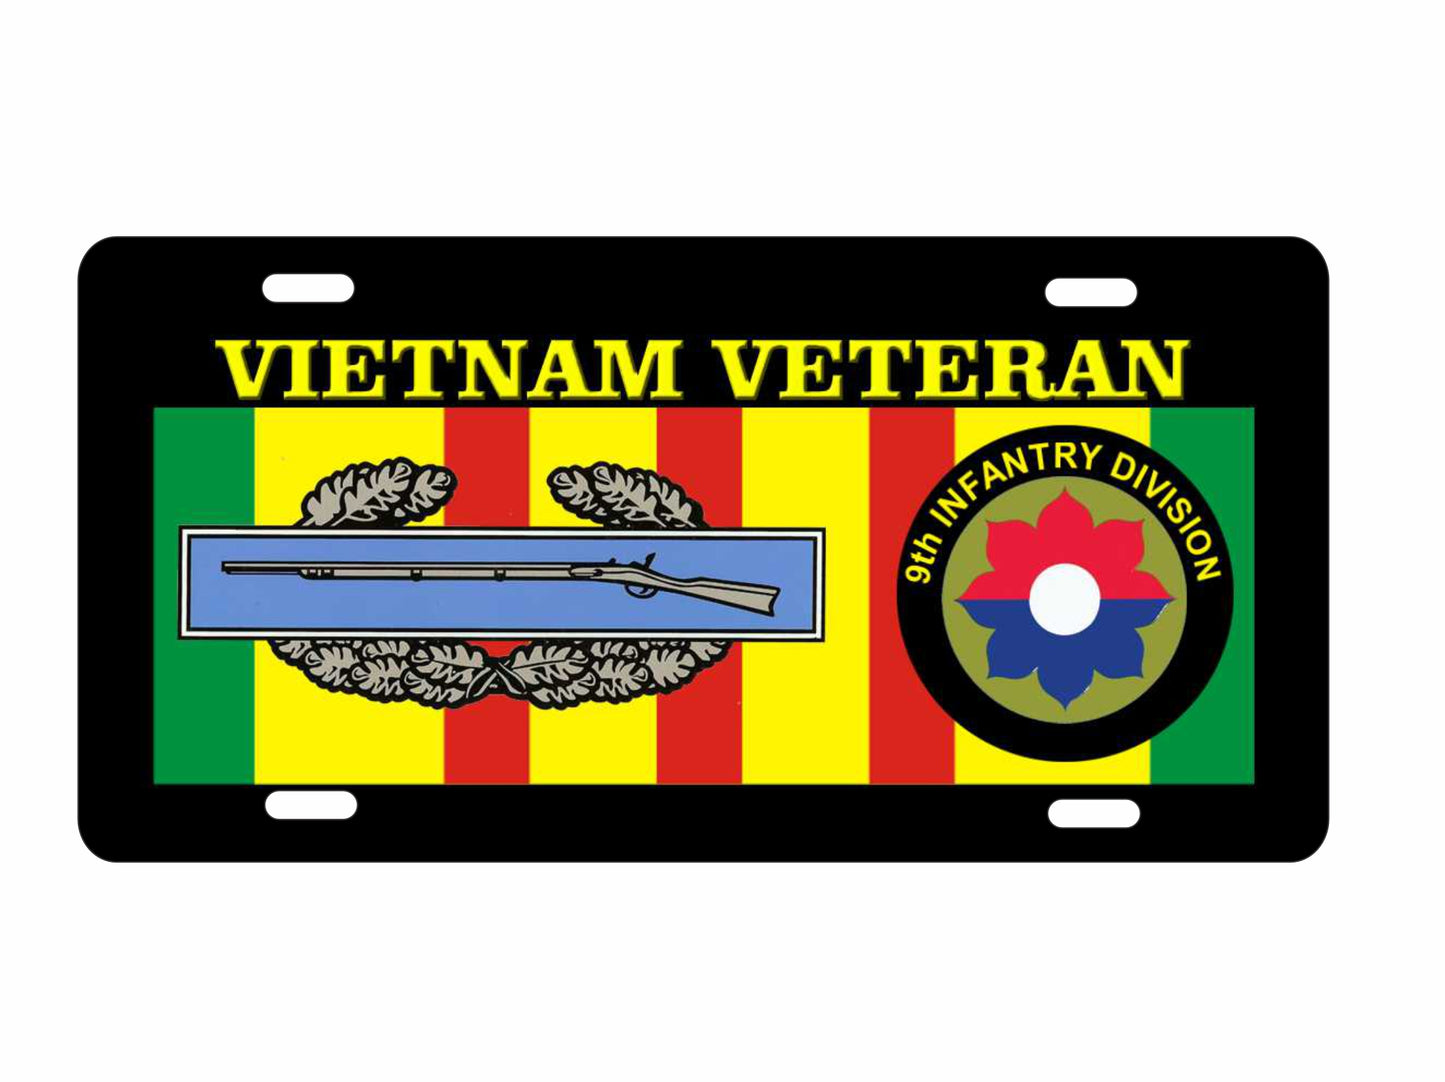 Vietnam veteran 9th infantry division combat infantry badge novelty license plate car tag decorative military aluminum front plate